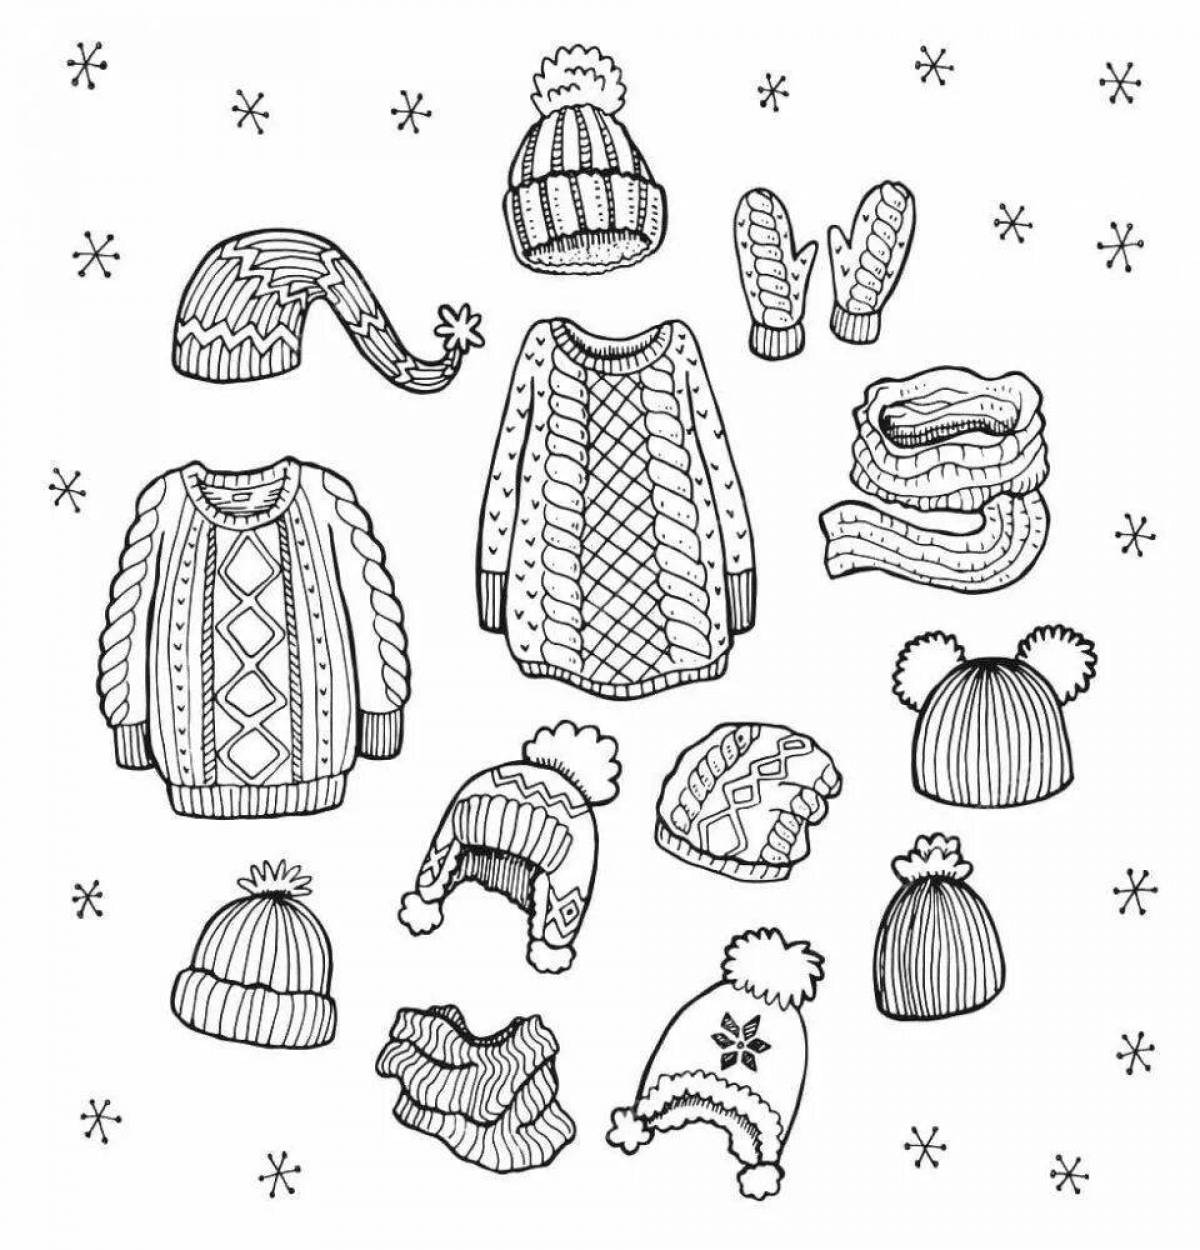 Coloring book sparkling winter clothes for babies